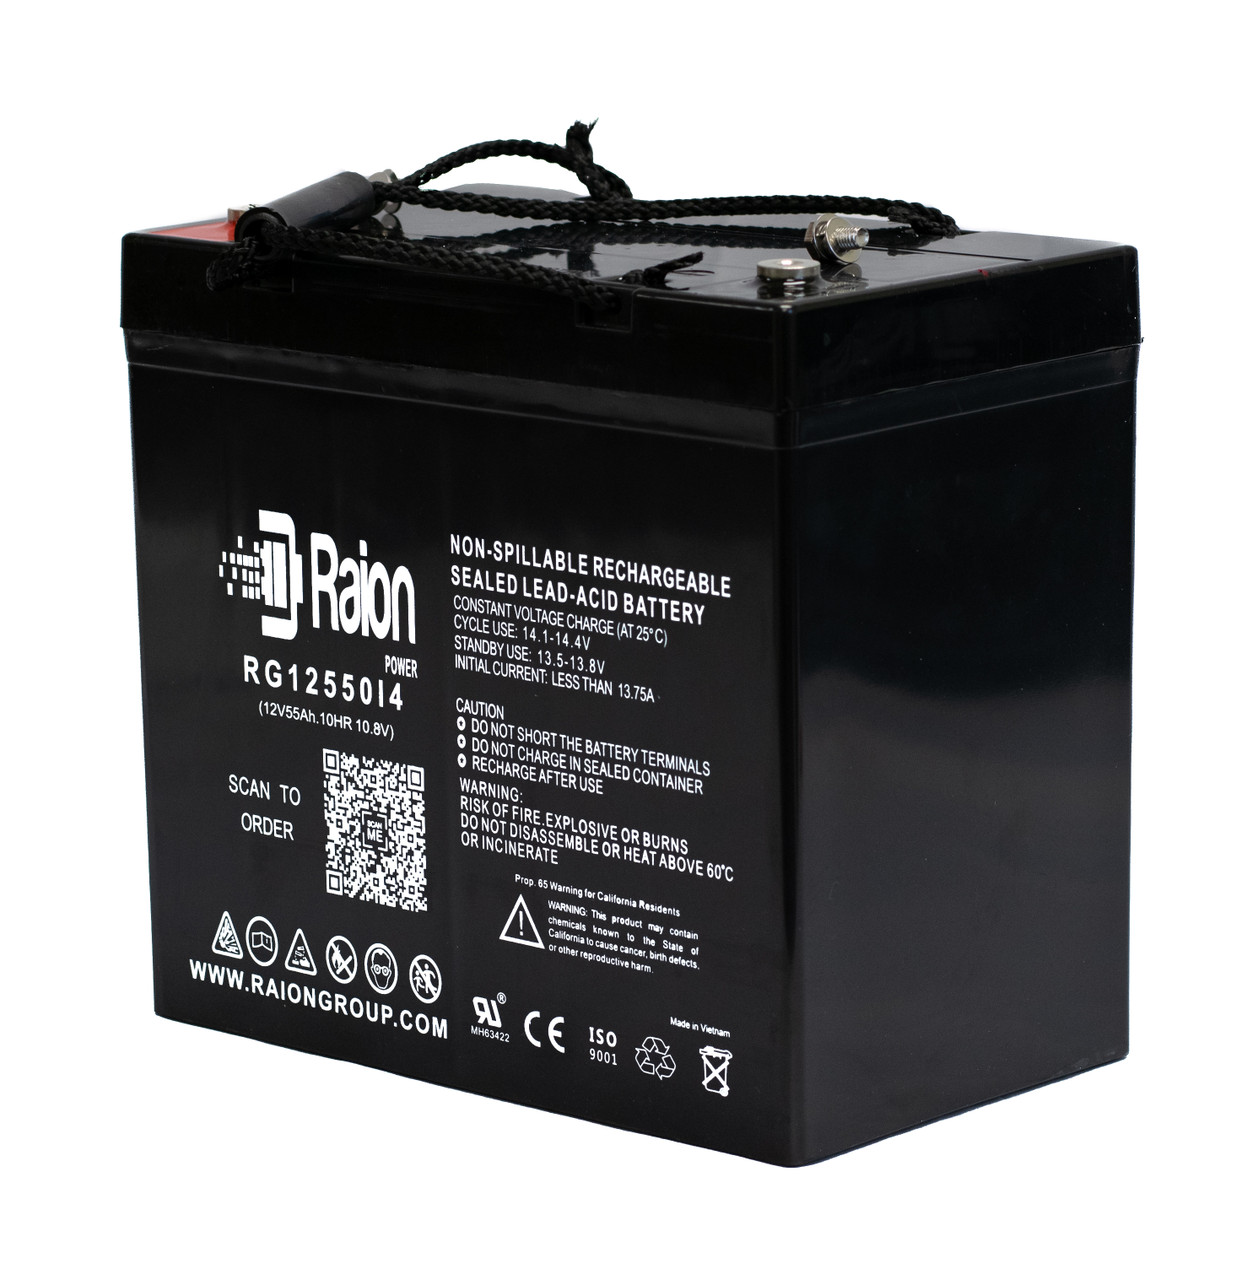 Raion Power 12V 55Ah 22NF Mobility Scooter Battery Replacement for Merits MP1IU